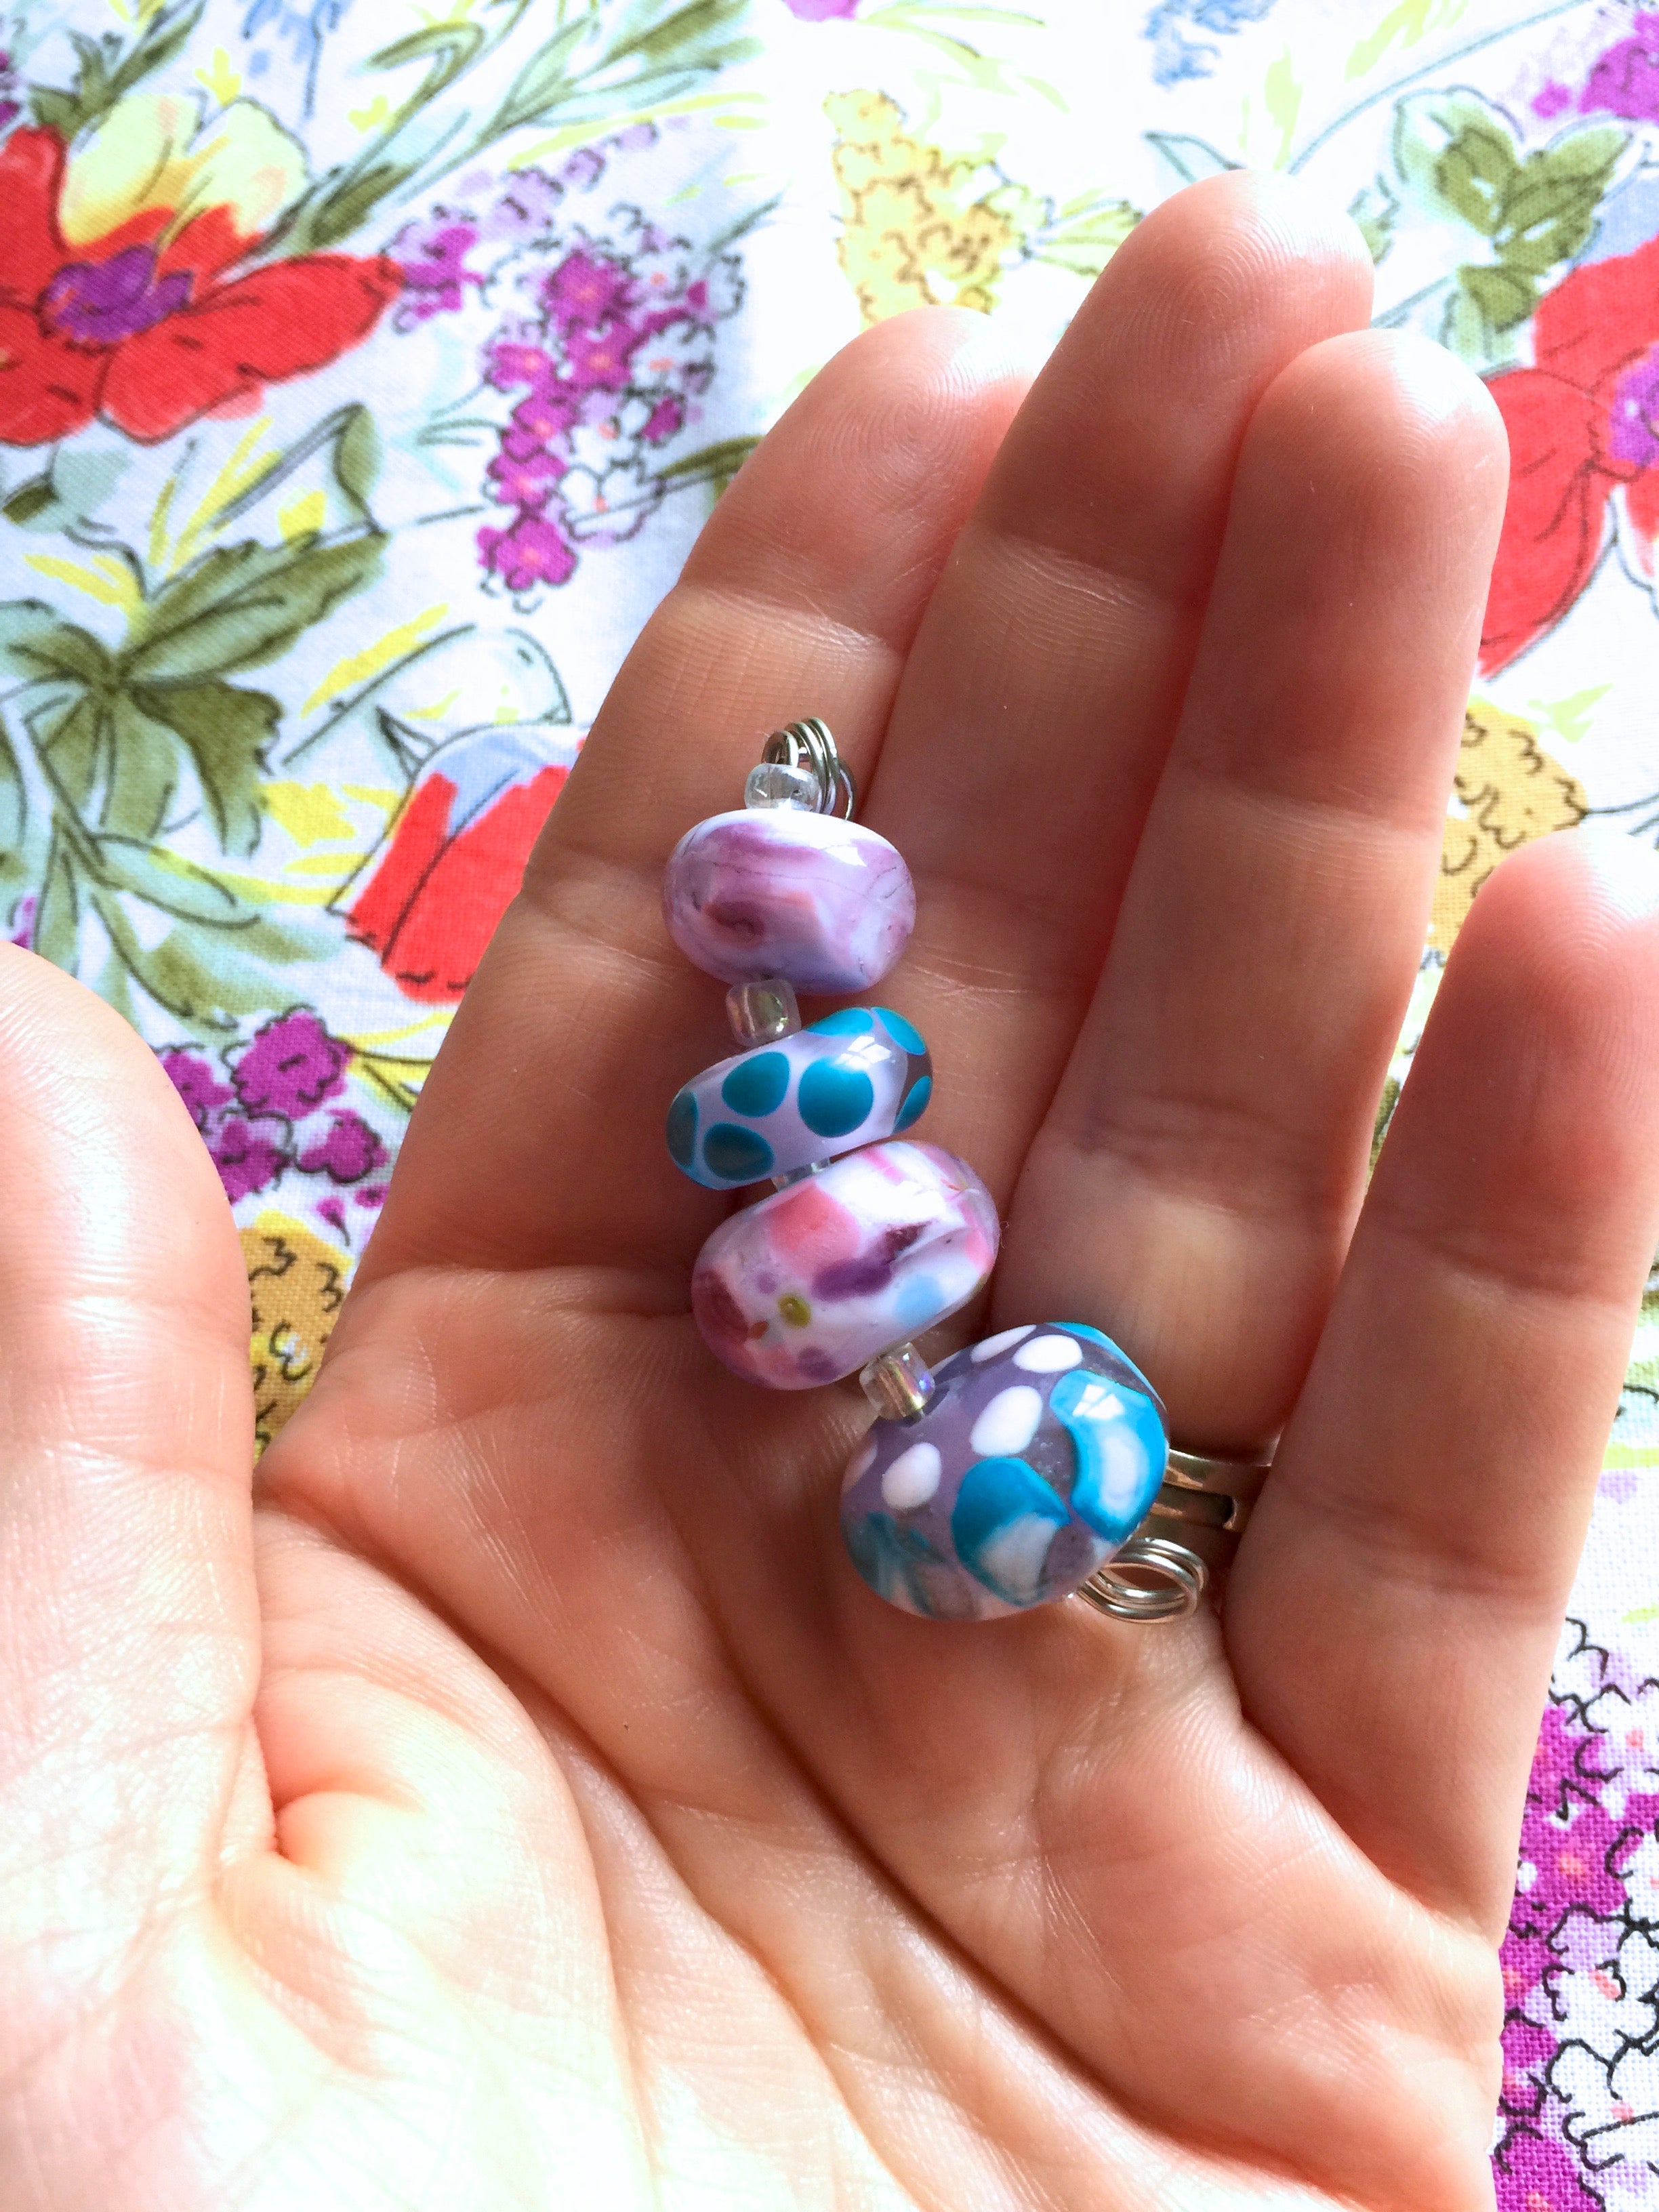 Set of 4 Handcrafted Lampwork Glass Beads in shades of Pink, Blues, Violet with spots and swirls.